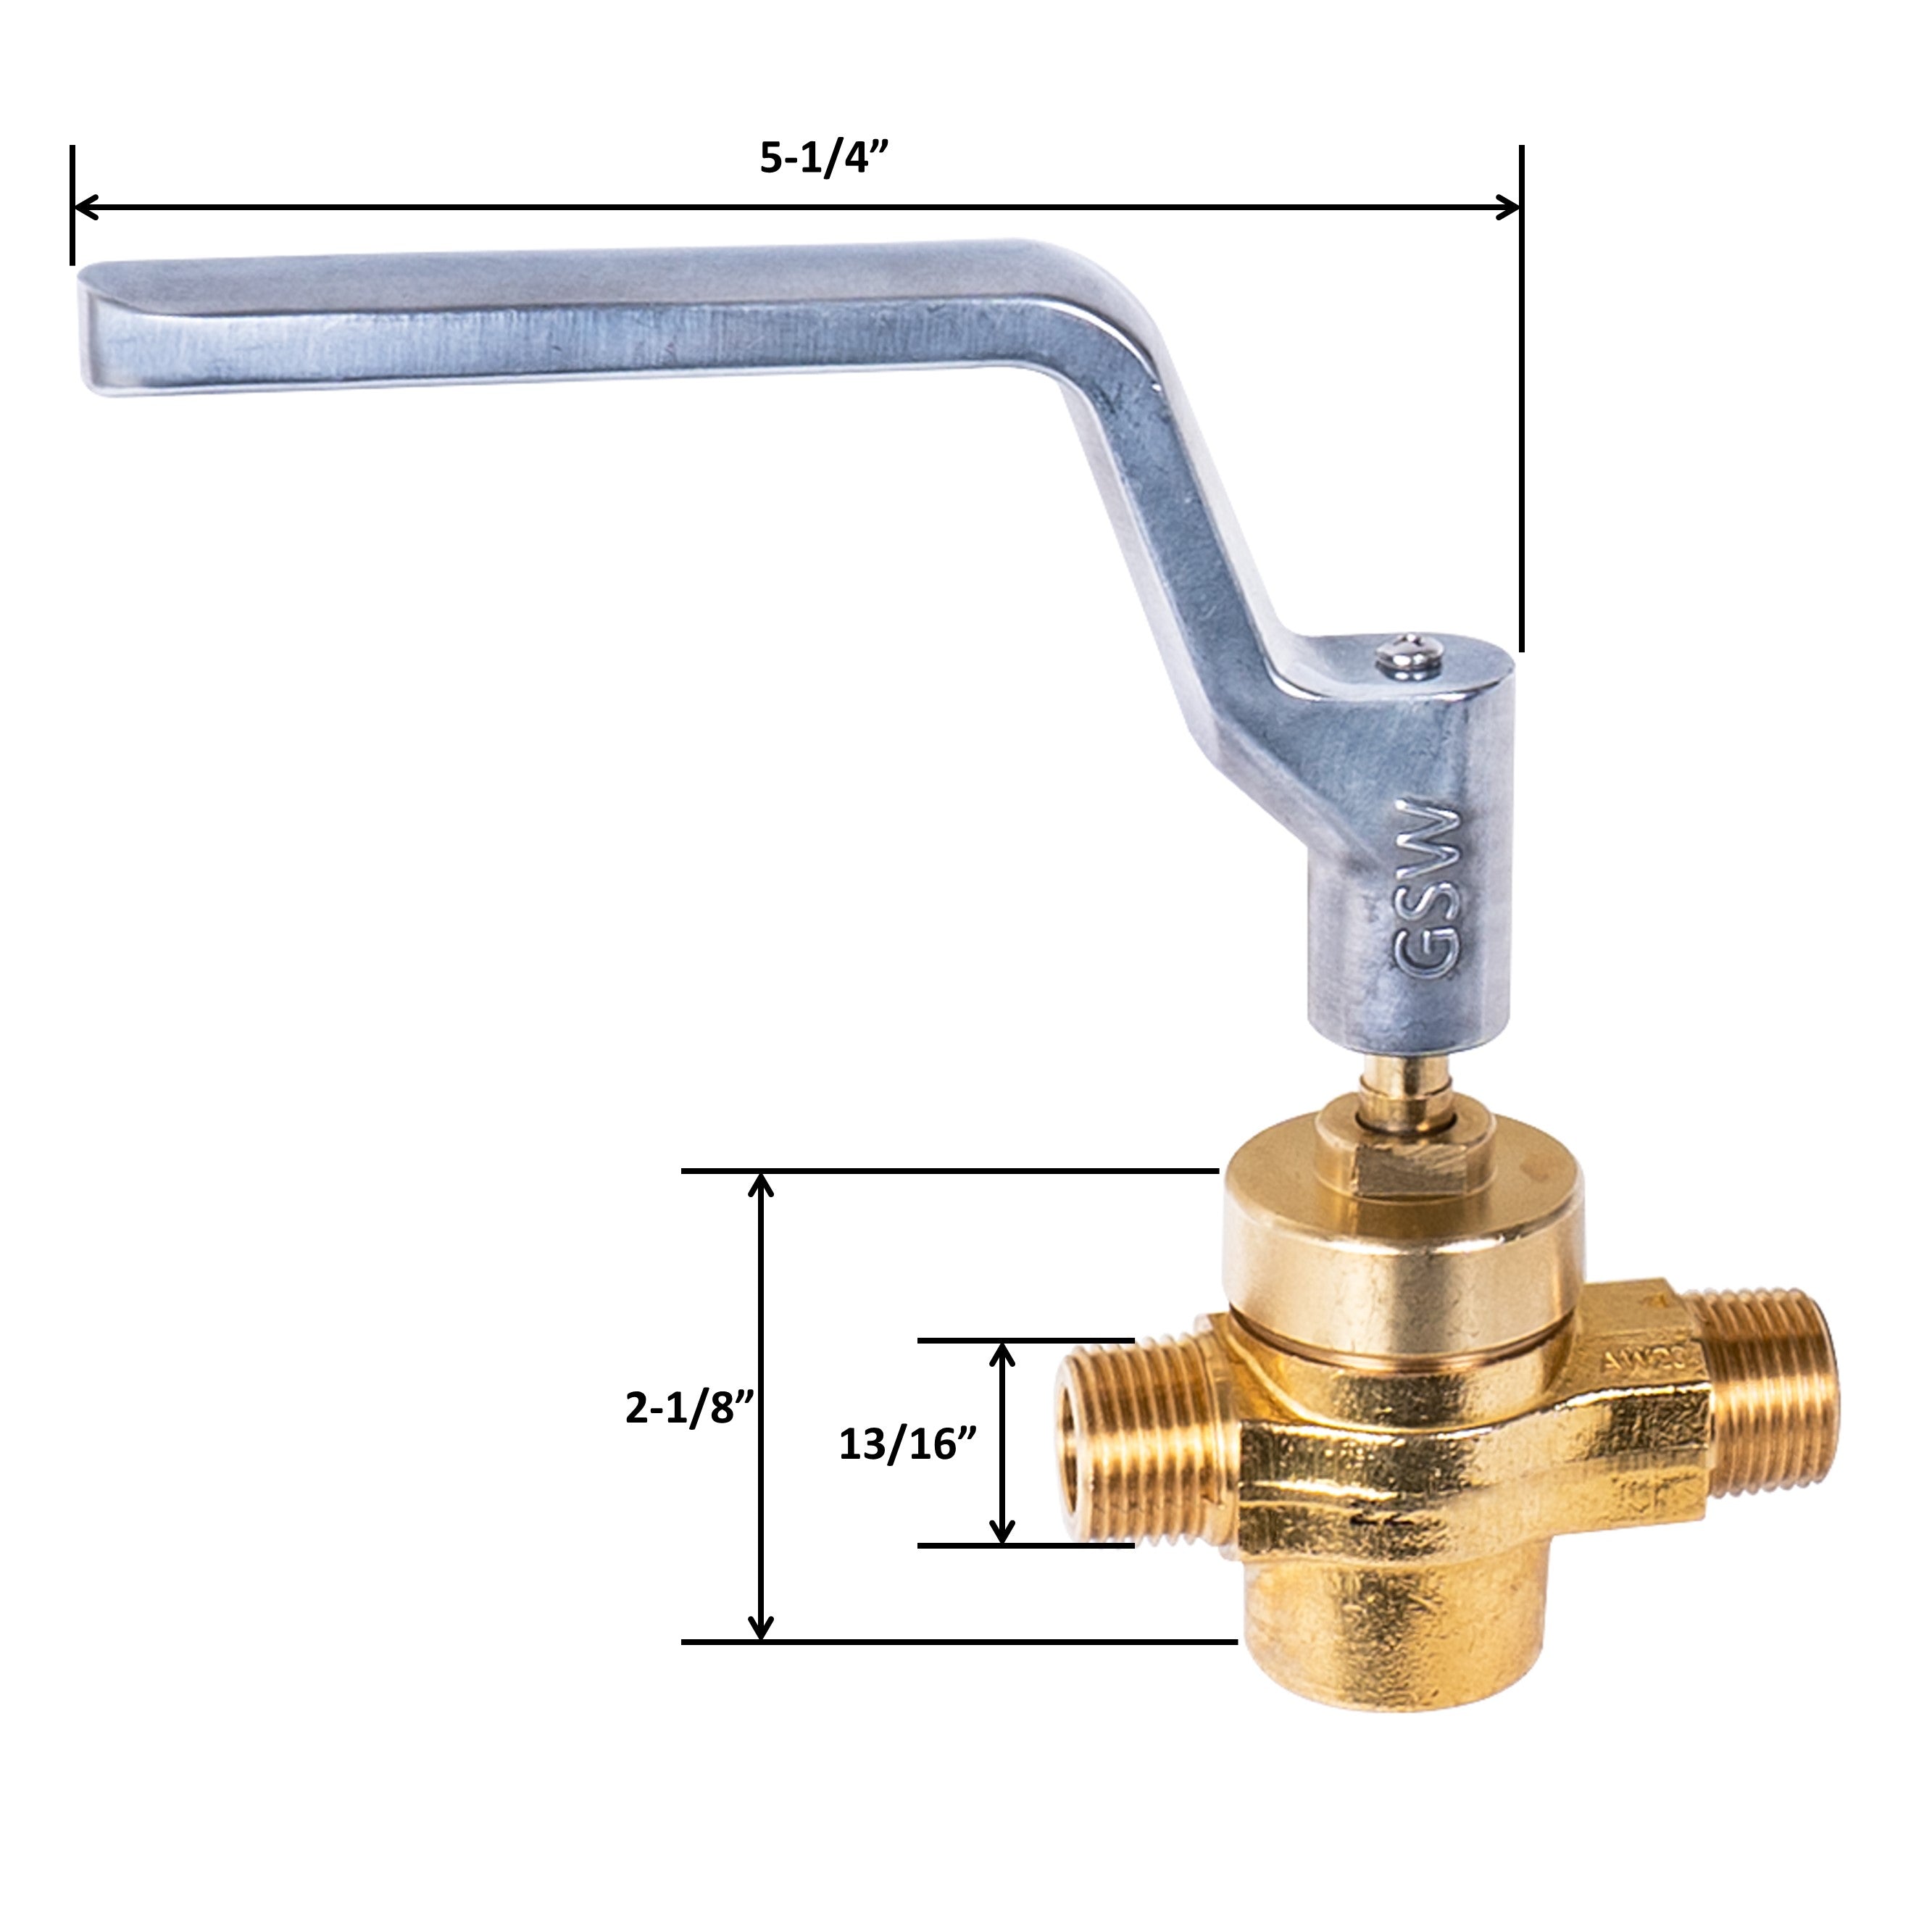 GSW WR-GV Copper Gas Valve with Handle for Commercial Wok Range, ETL Approved, 1/2" NPT X 1/2" NPT 1/2 PSI